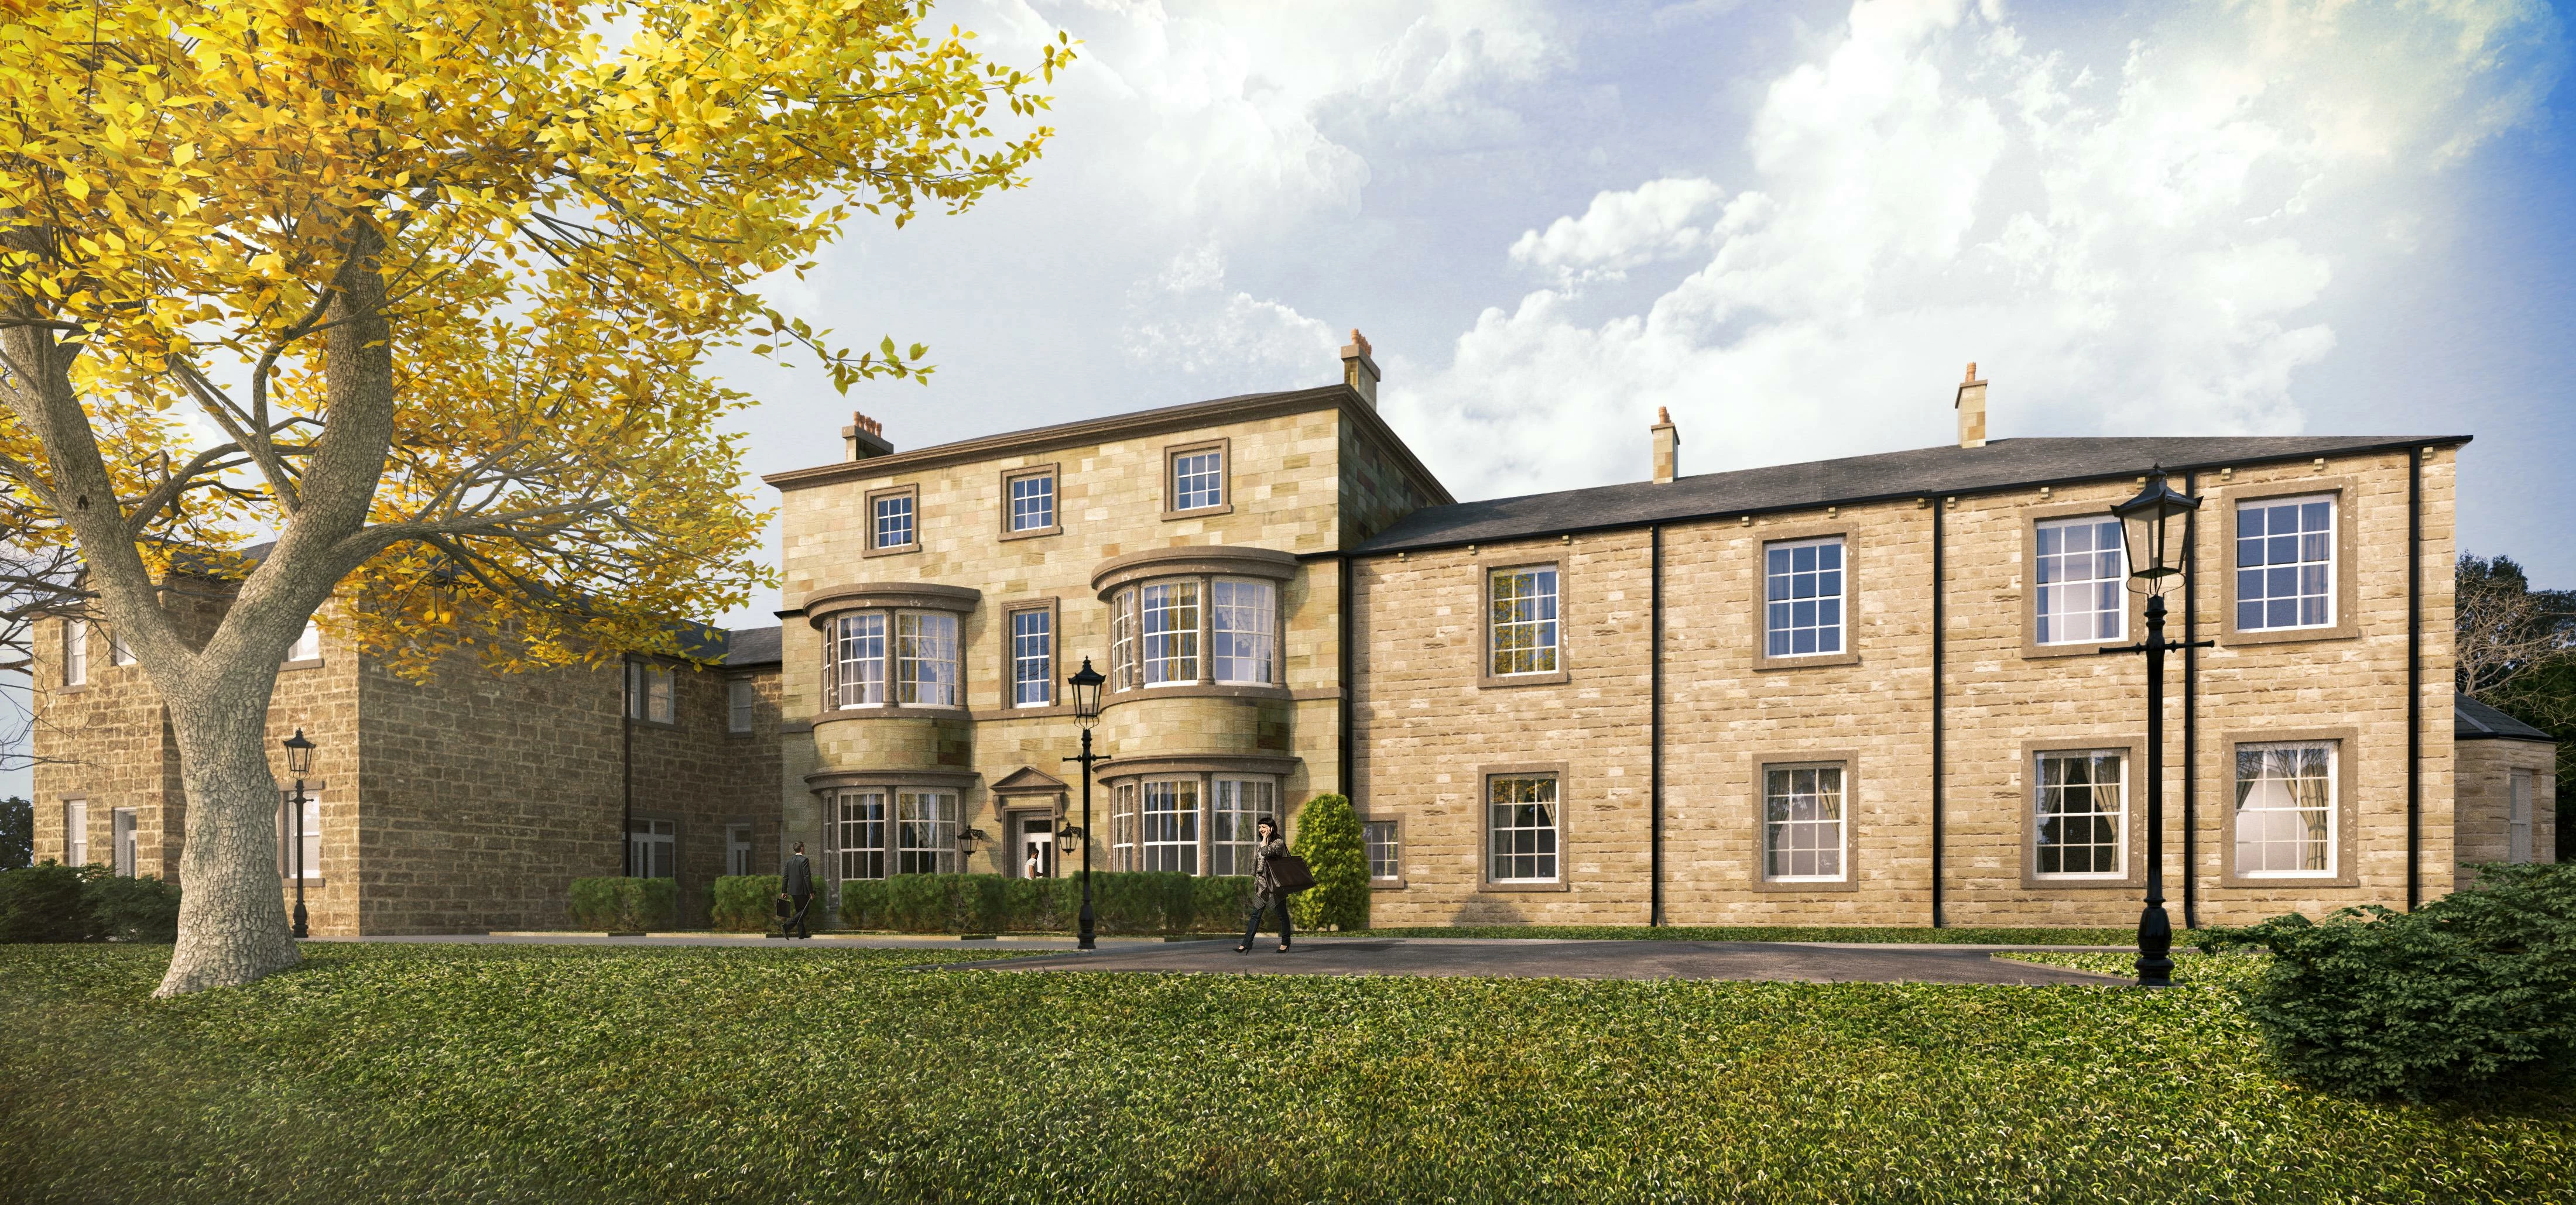 Jenkin House - the Grade 2 listed building has enetered a new era after being transformed into resid